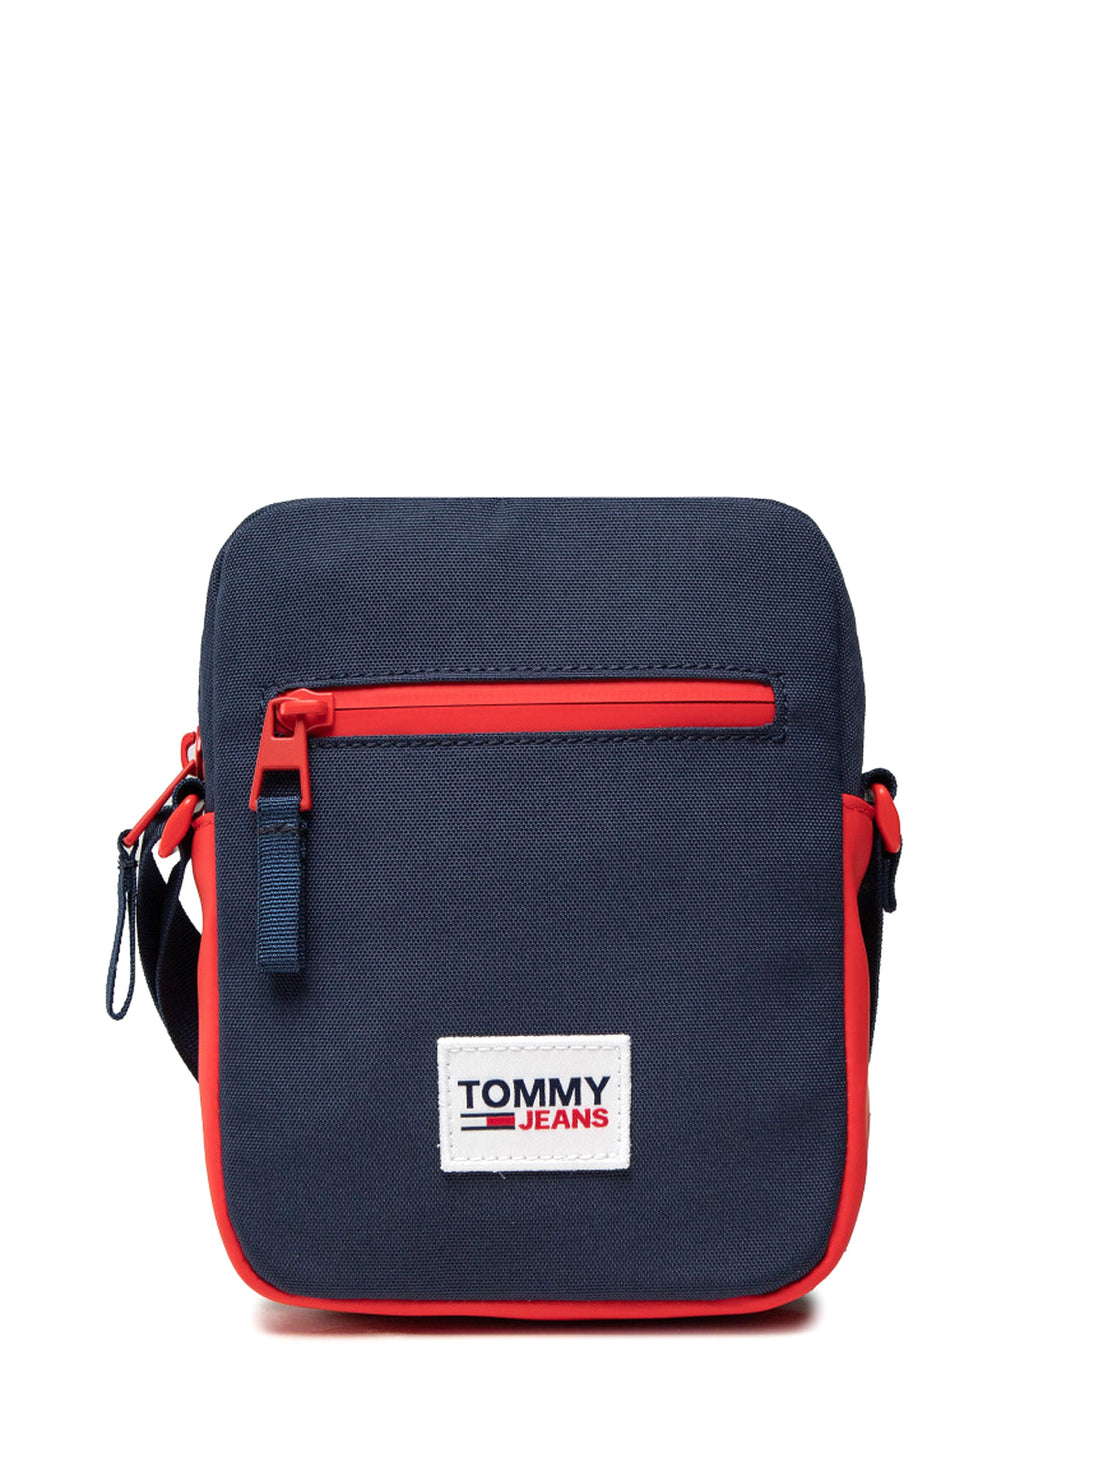 Tracolla Blu Tommy Jeans